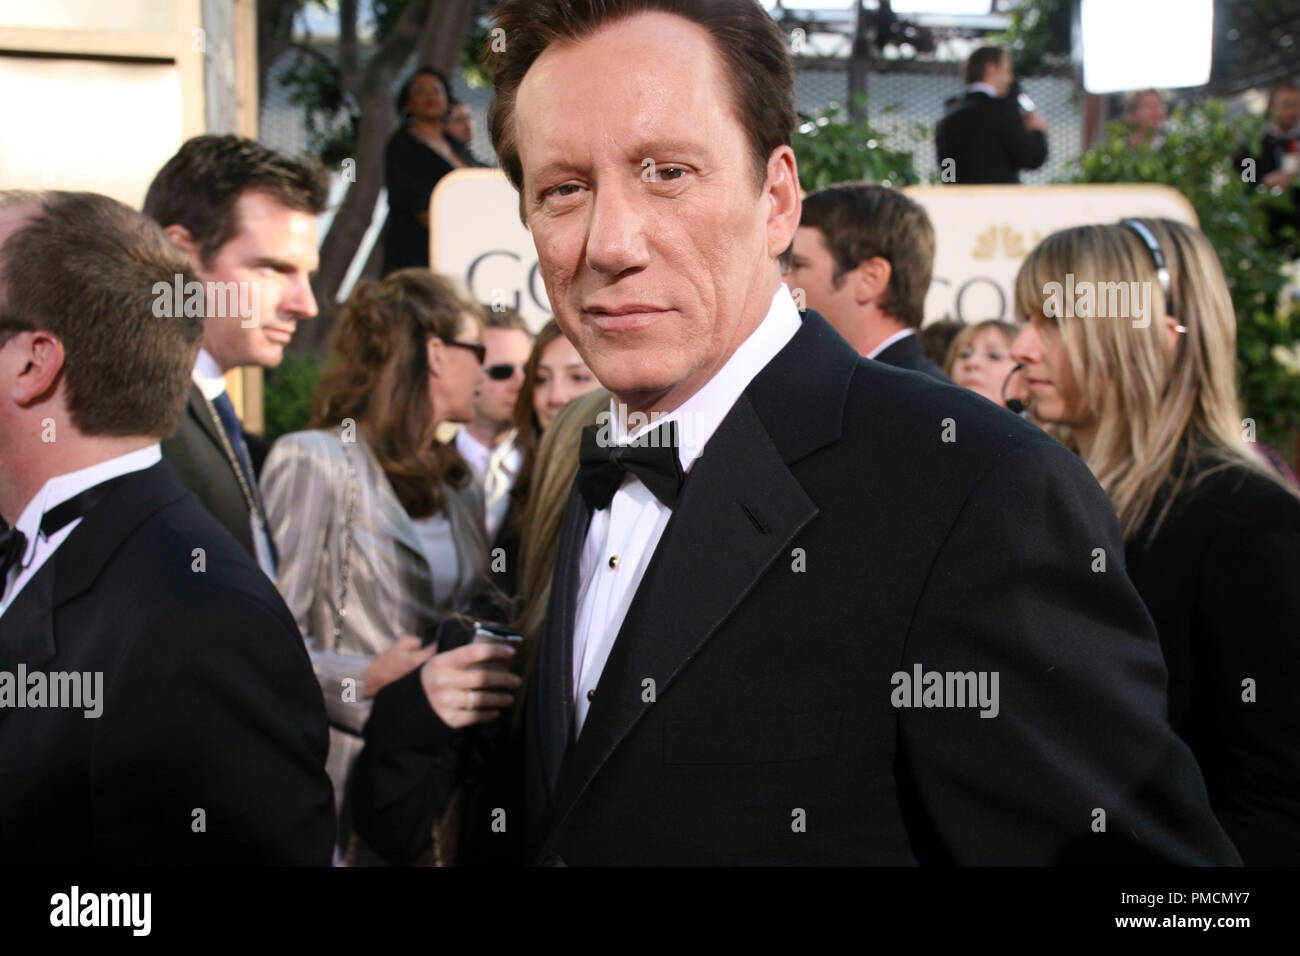 Hollywood Foreign Press Association presents the 2007 'Golden Globe Awards - 64th Annual' (Arrivals) James Woods 1-15-07 Stock Photo